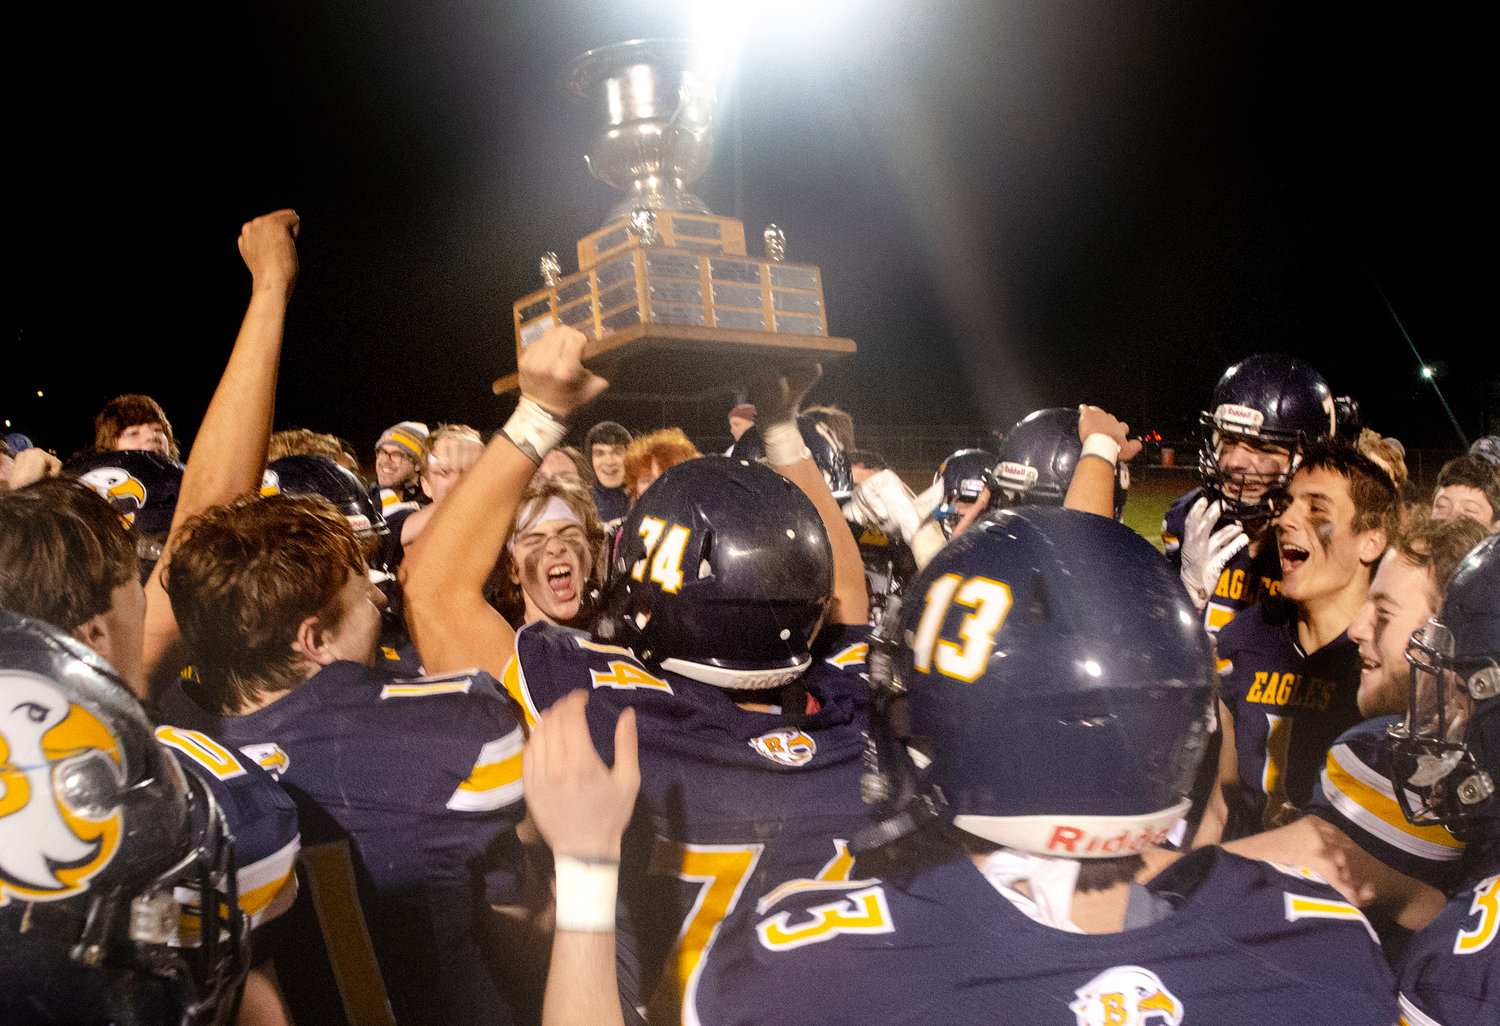 The Eagles hoist the trophy after the Thanksgiving Day game, played on Thursday night.